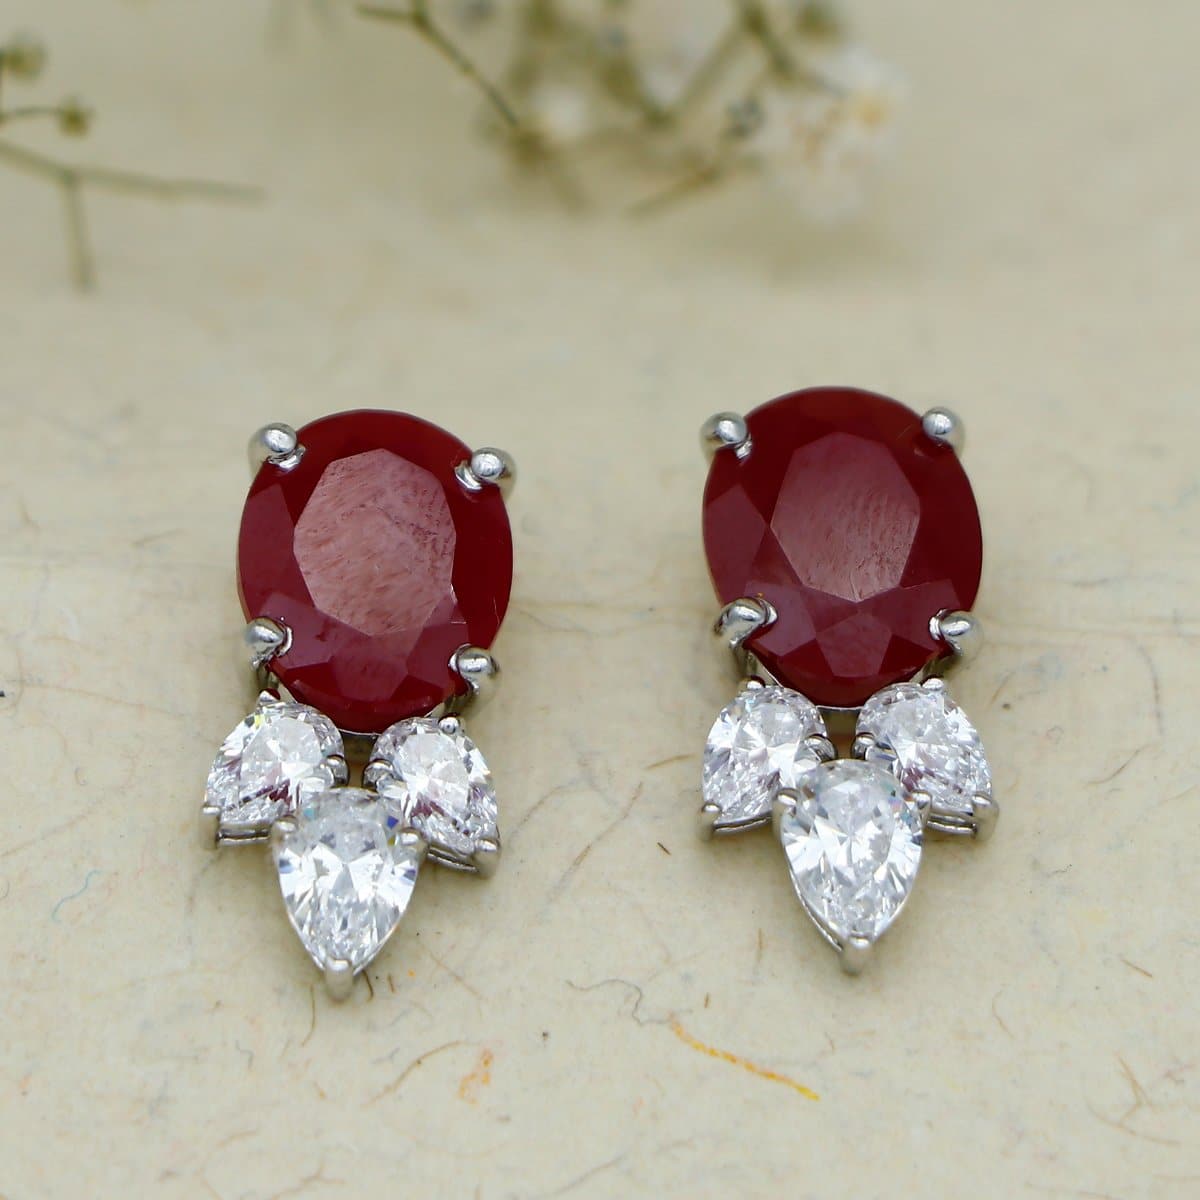 Red Tranquil Silver Earrings with Swarovski Zirconia